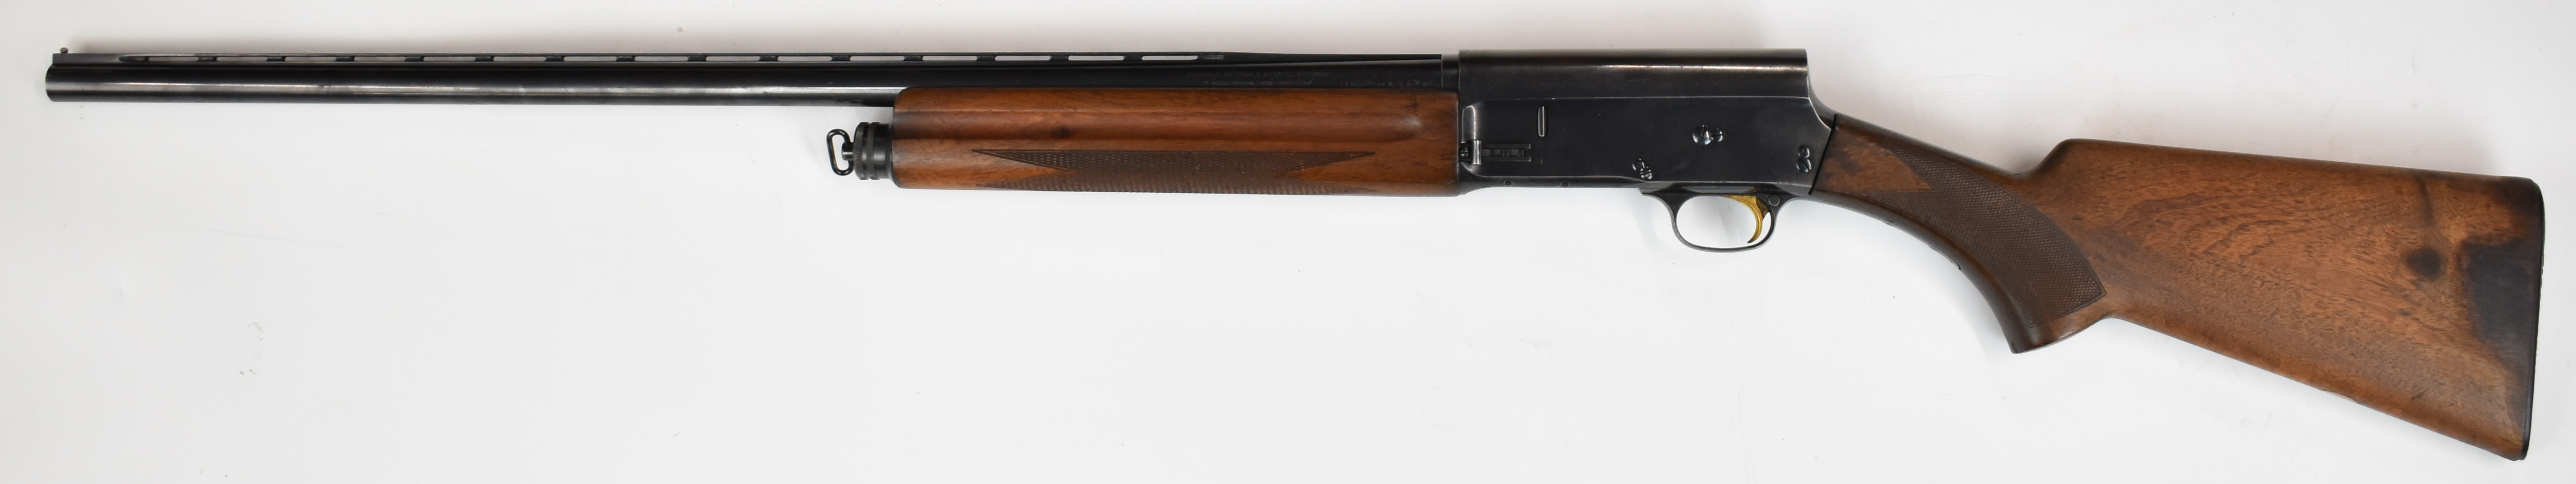 Browning 16 bore 3-shot semi-automatic shotgun with chequered semi-pistol grip and forend and 27 - Image 2 of 18